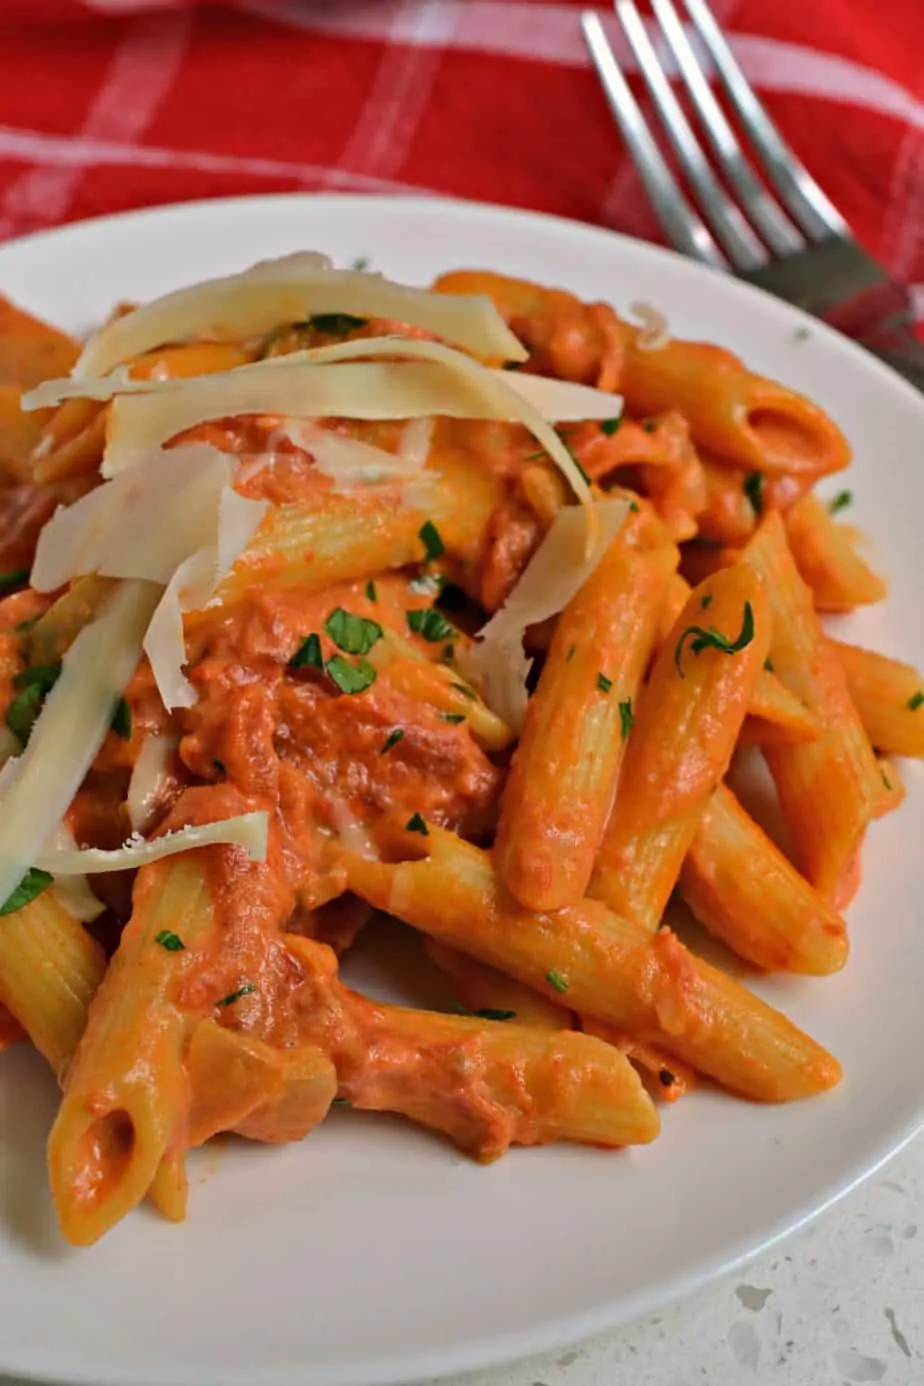 Penne alla Vodka is one of our favorite pasta dishes and you will be pleasantly surprised how well it all comes together. 